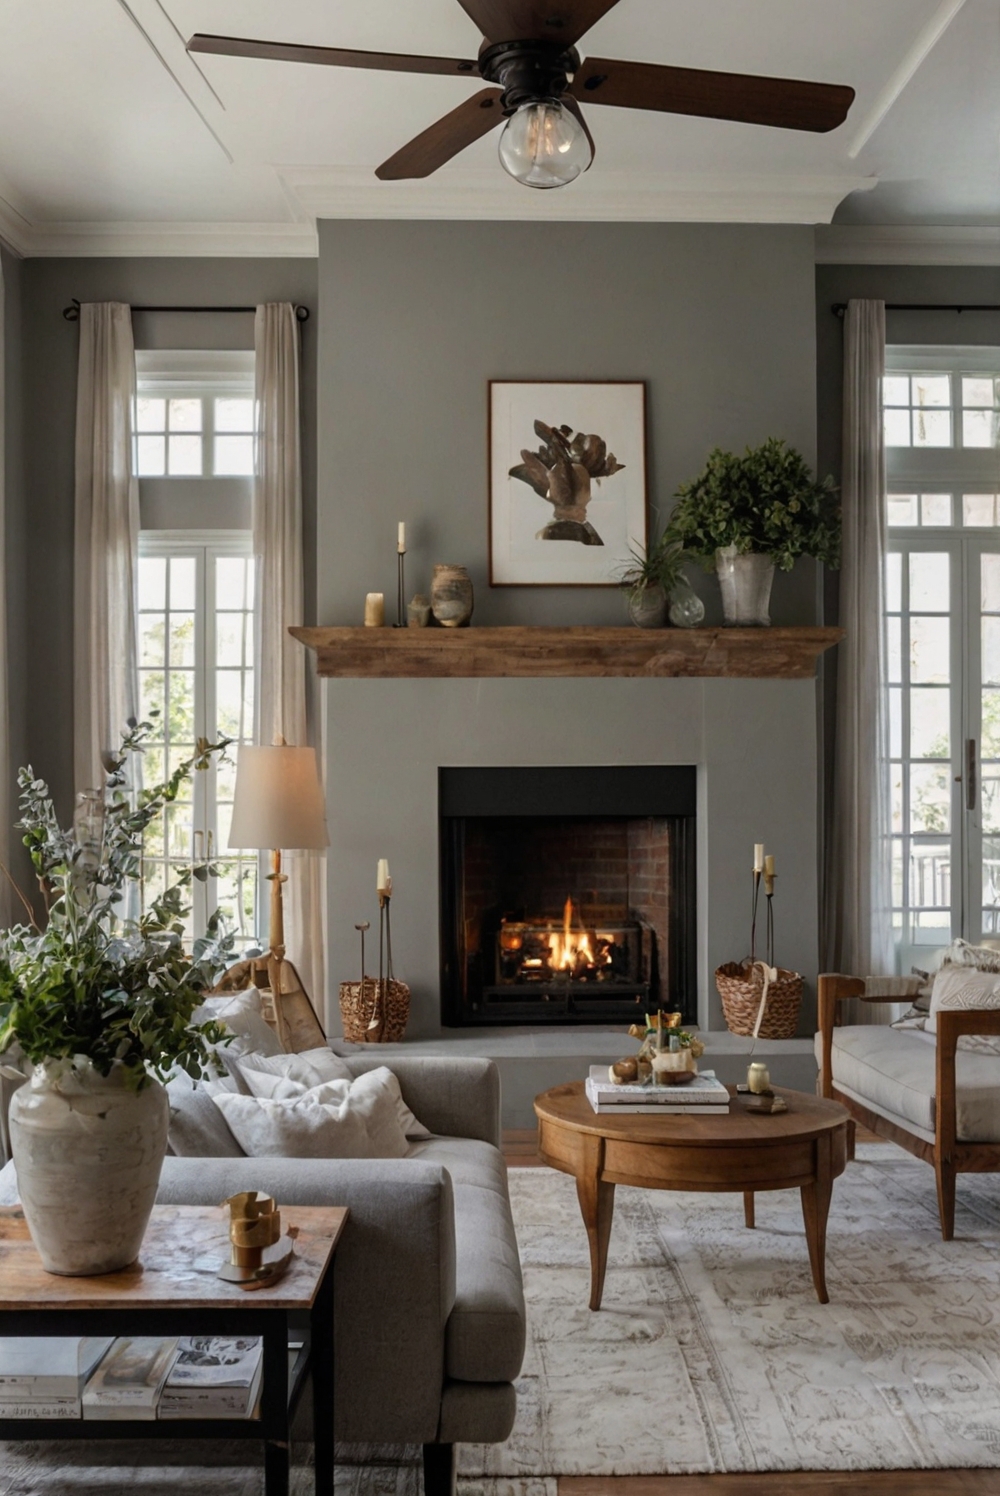 French country living room design, cozy fireplace design, home interior decor, space planning ideas, interior bedroom design, kitchen designs, paint color match